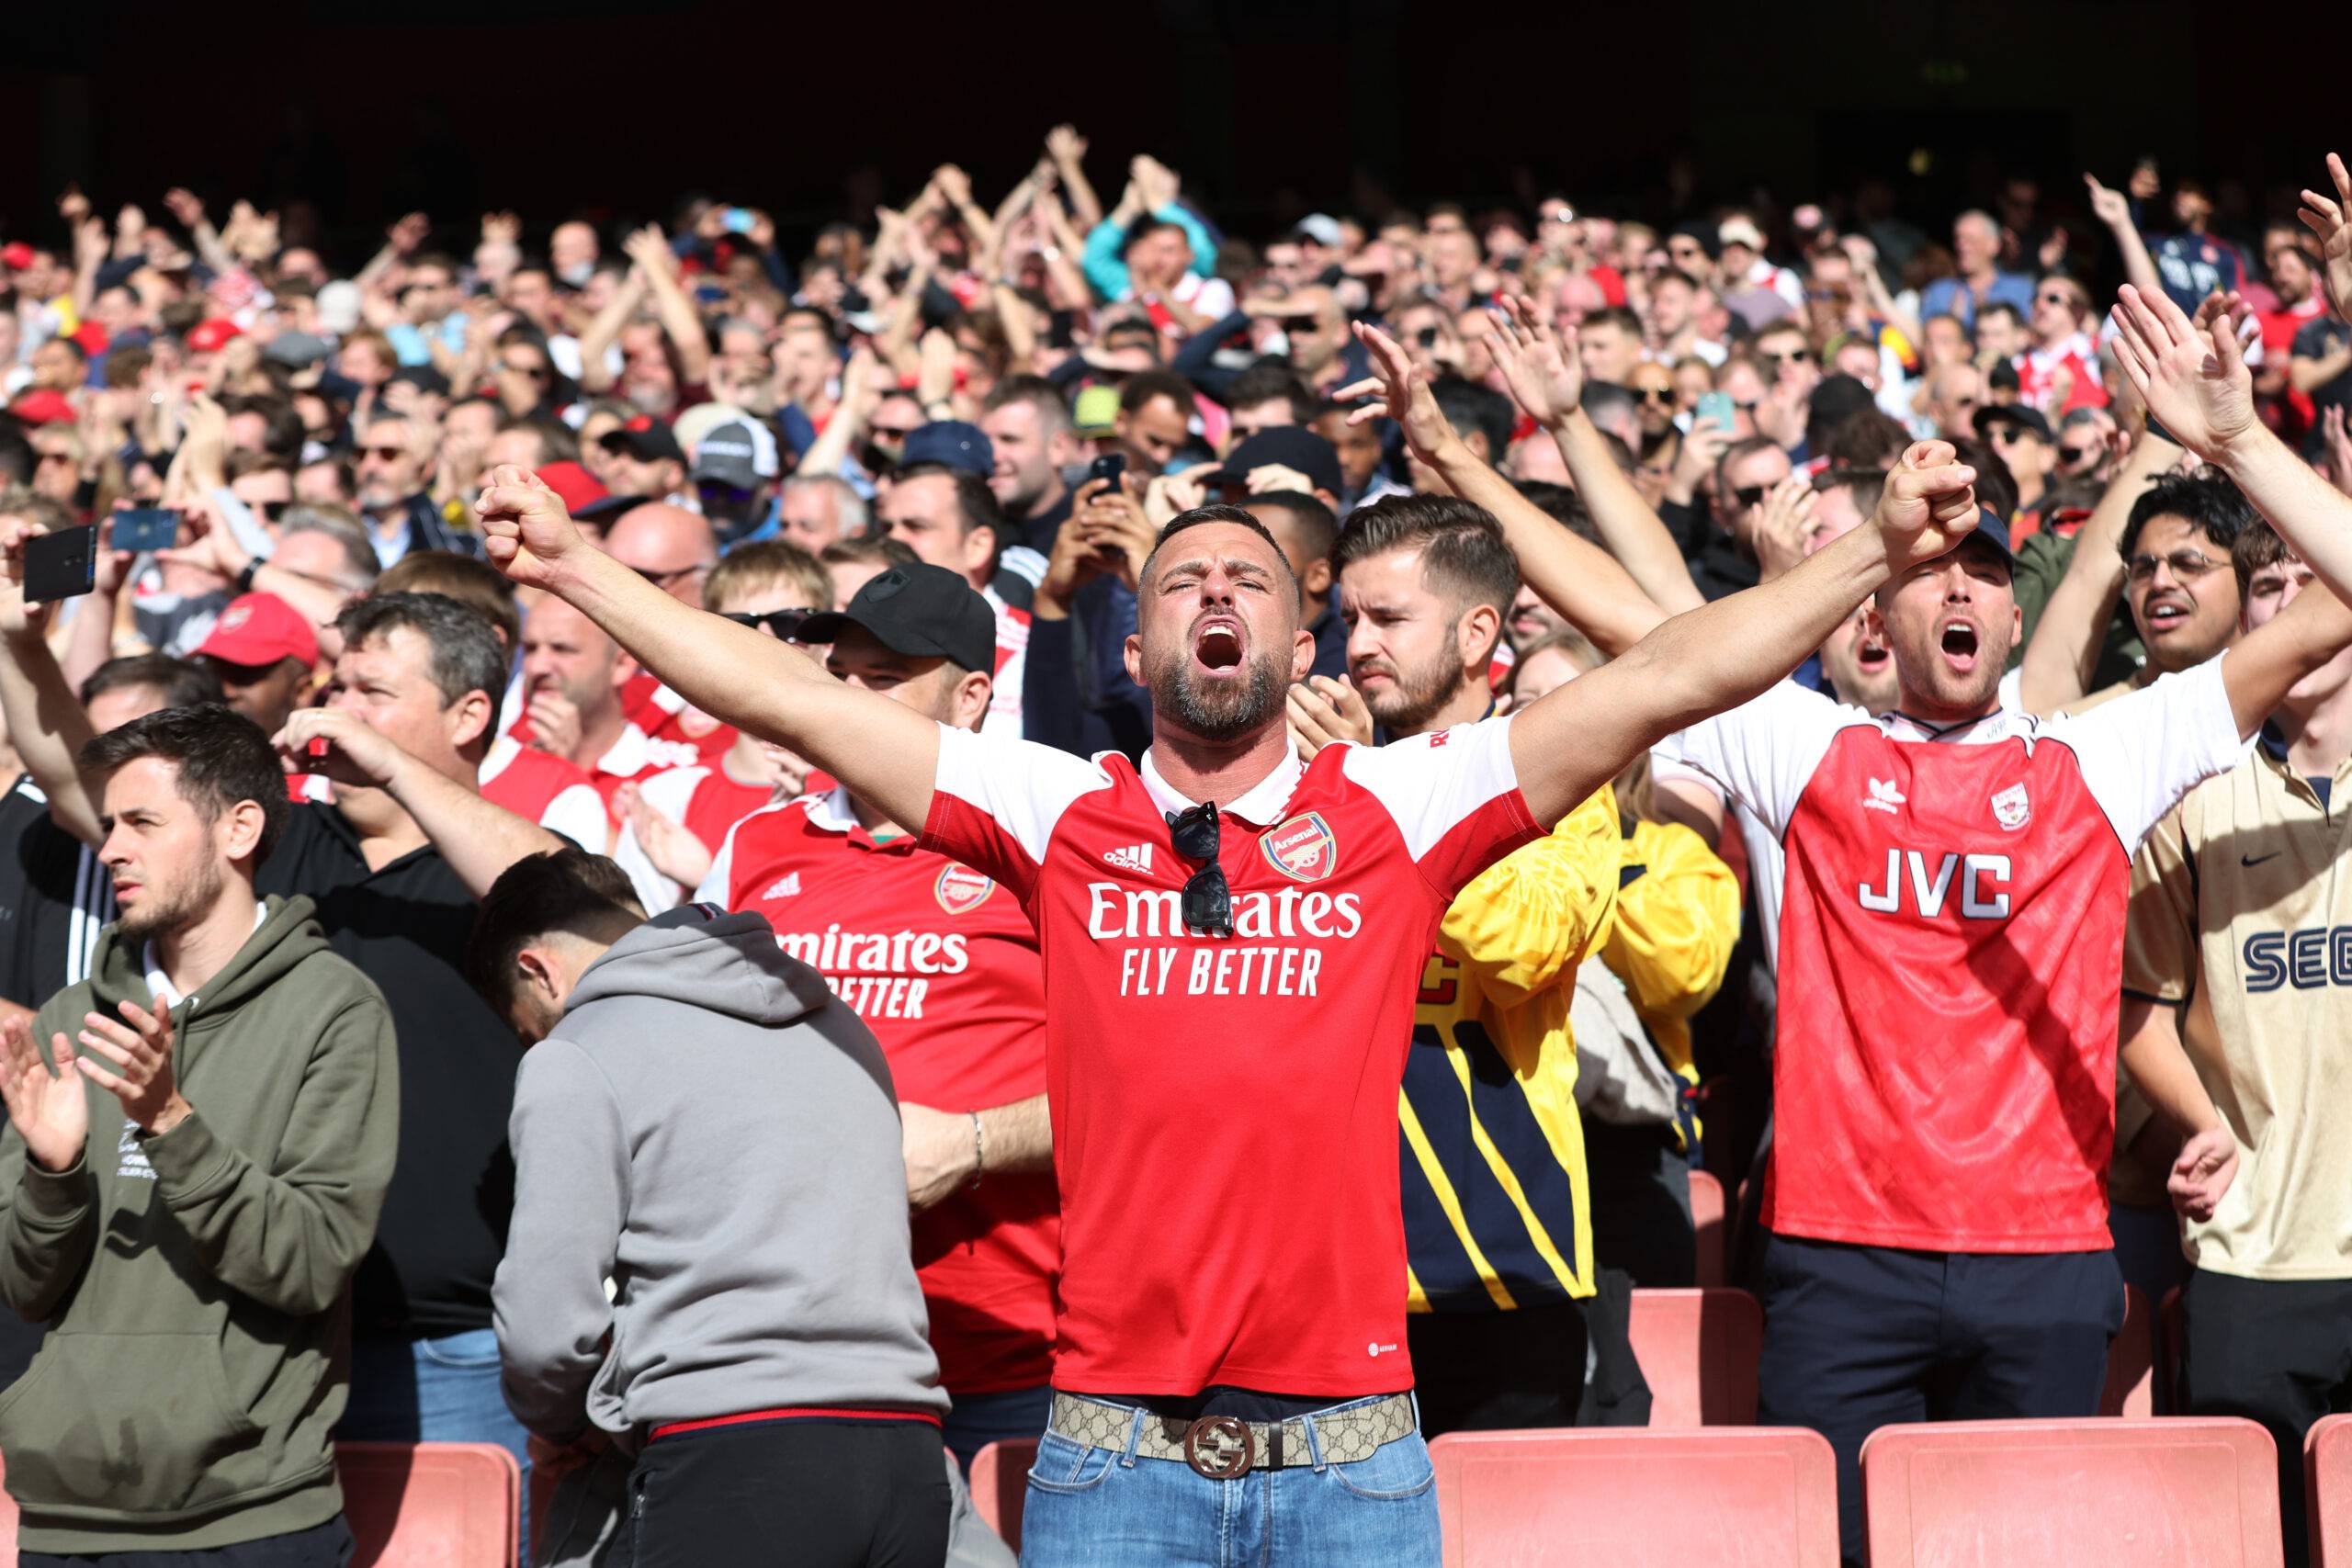 Arsenal fans in action